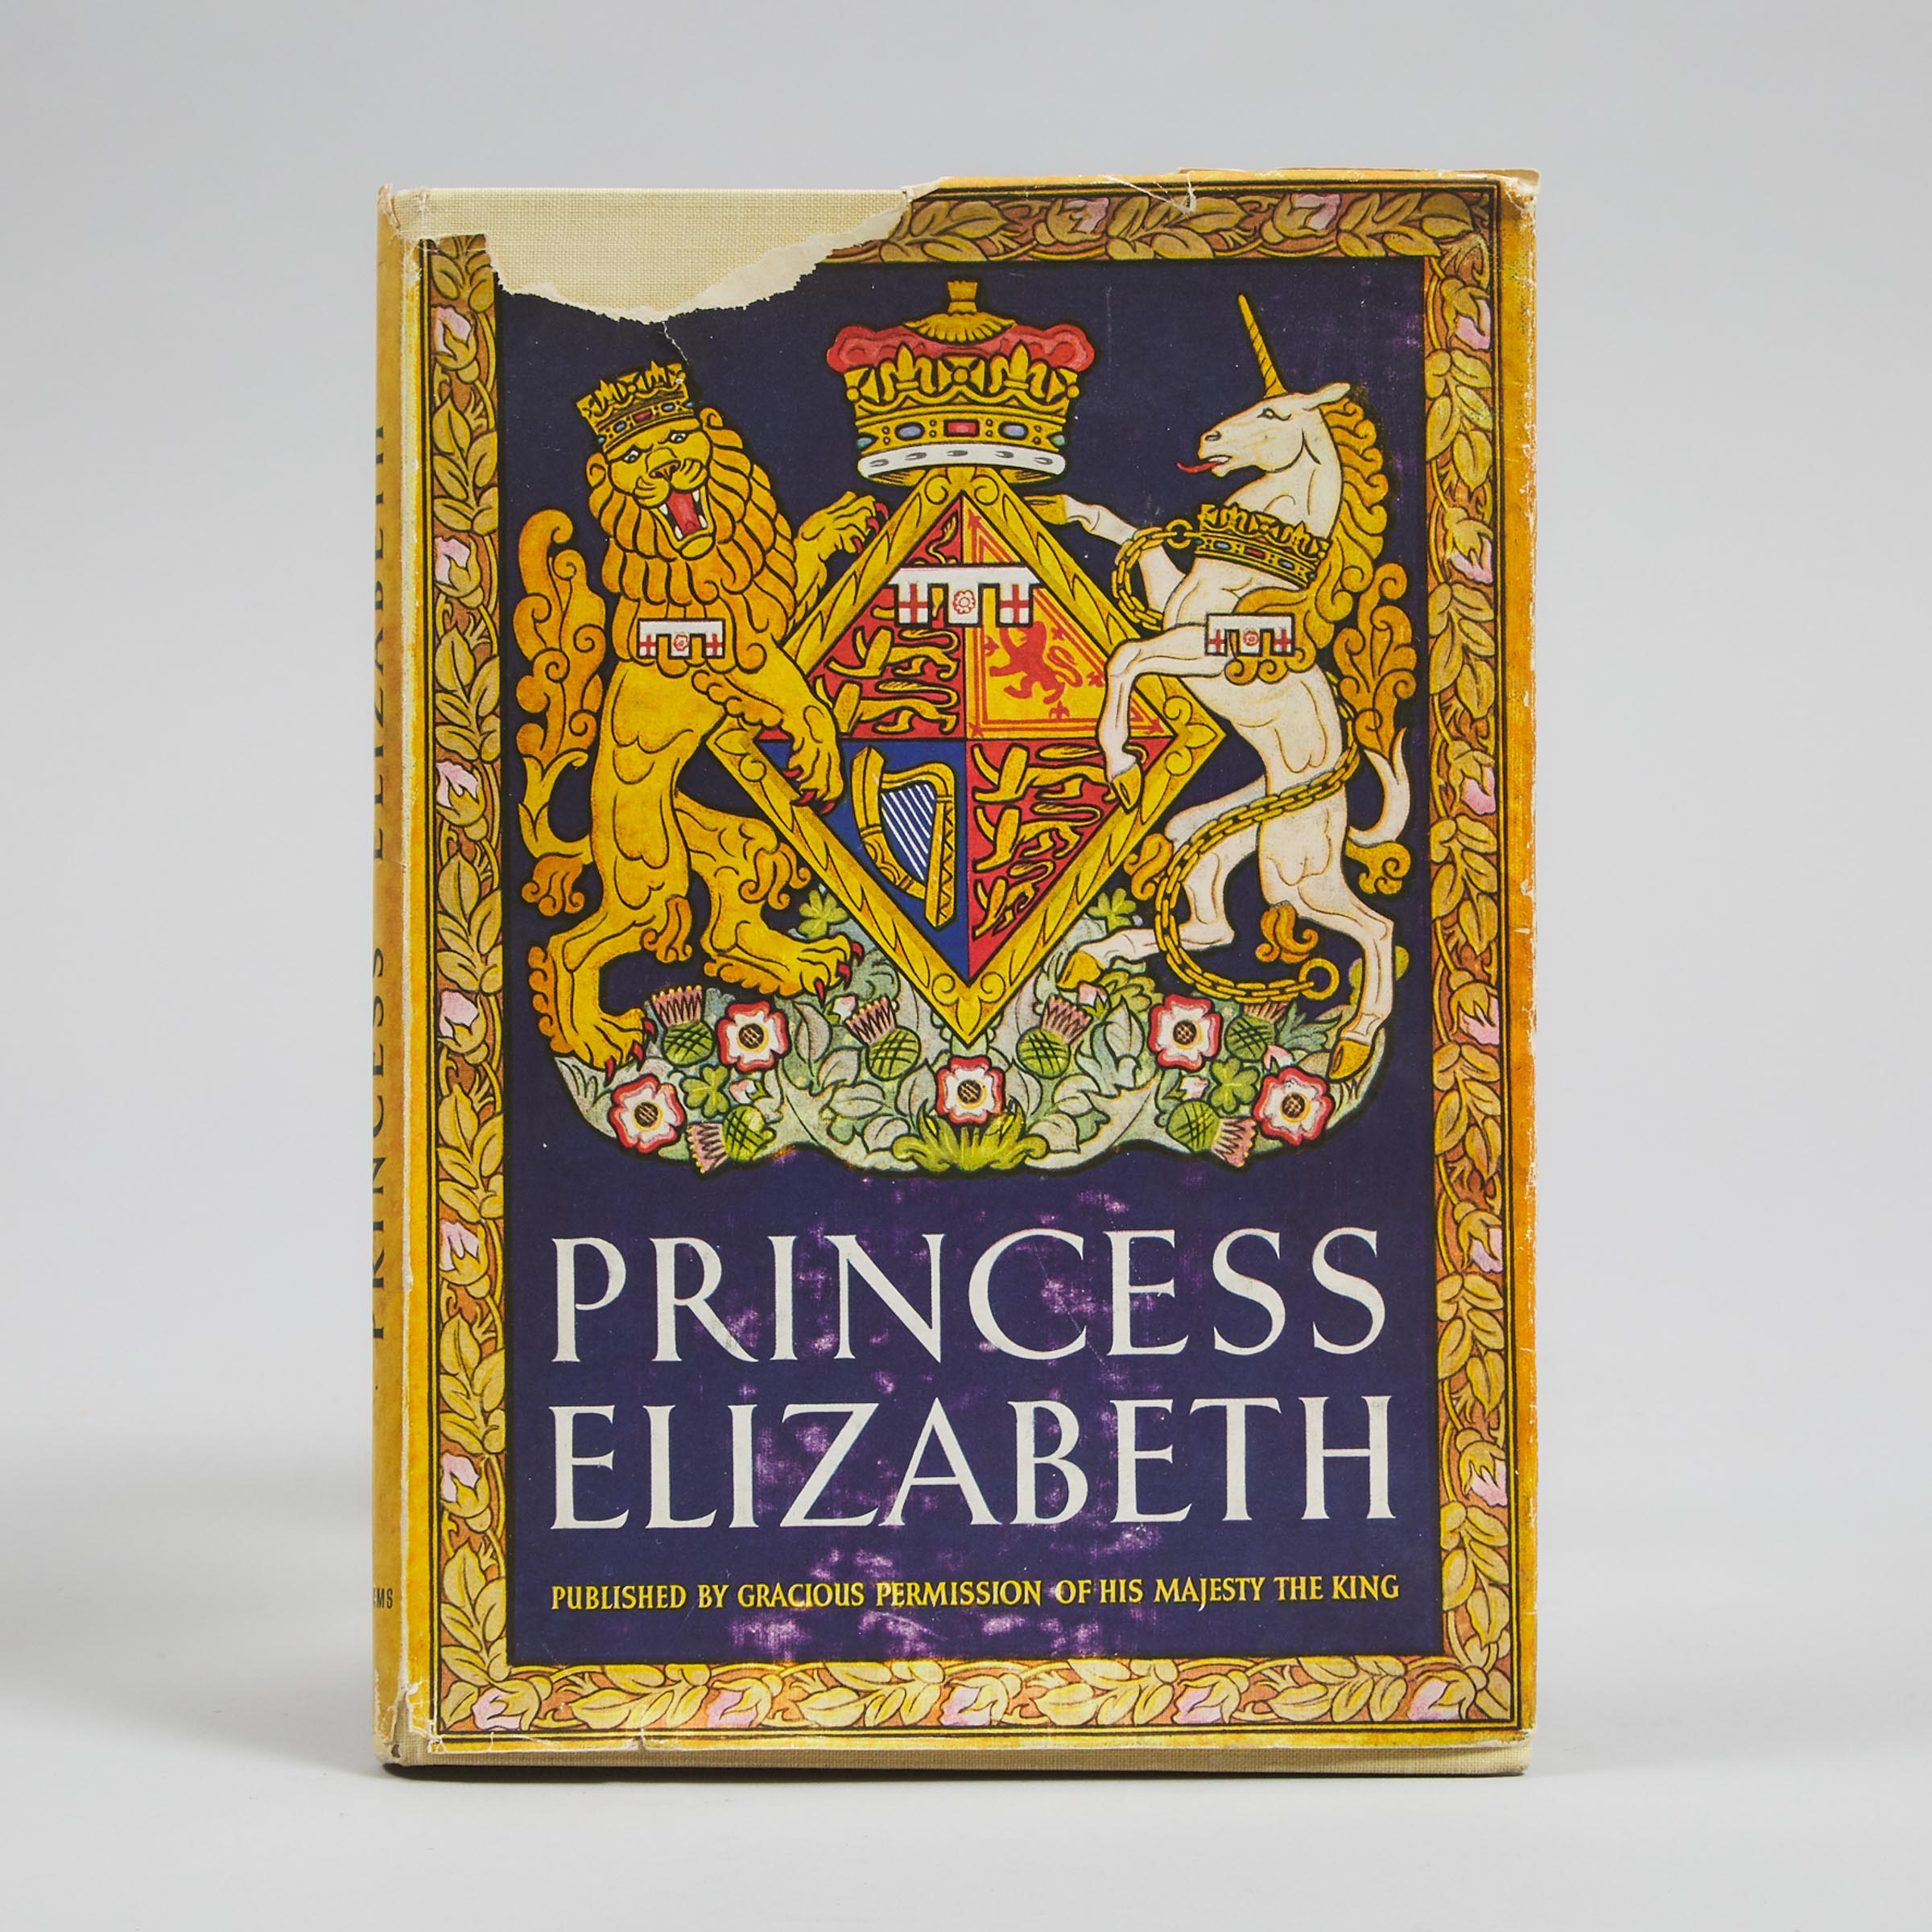 Signed Royal Presentation Copy of 'Princess Elizabeth, the Illustrated Story of Twenty-One Years in the Life of the Heir Presumptive', 1947